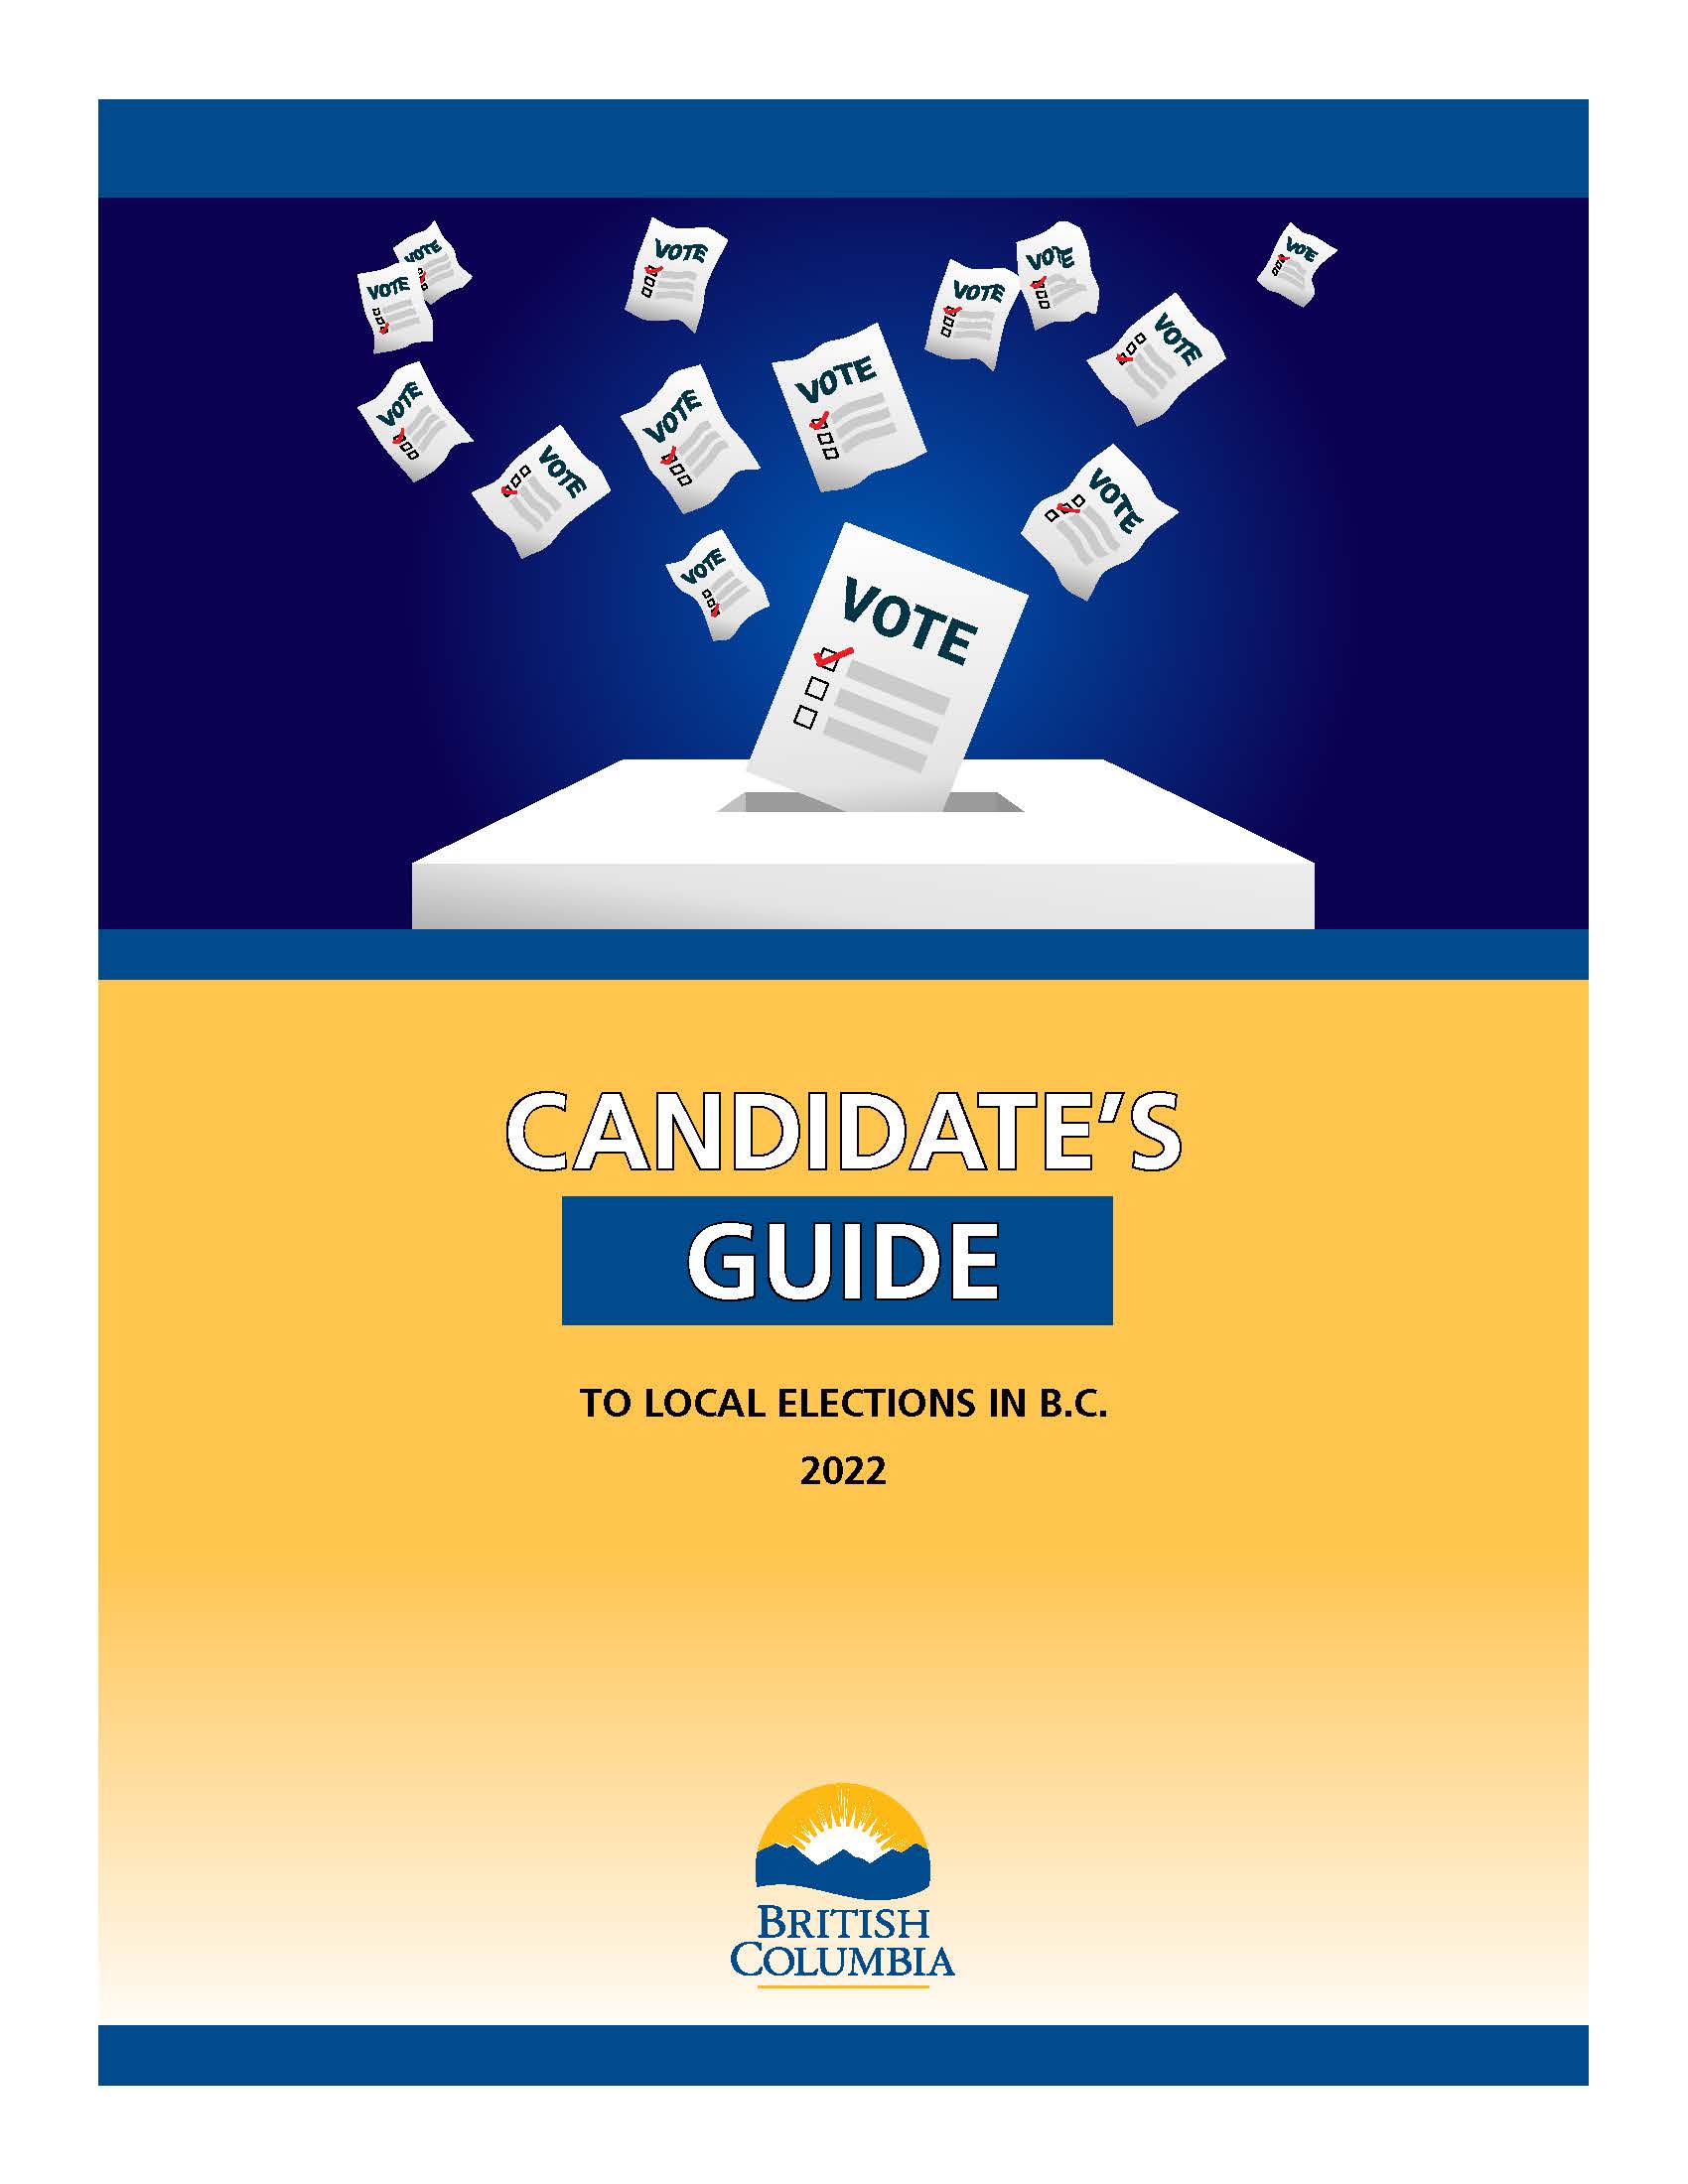 Candidate's Guide to local elections